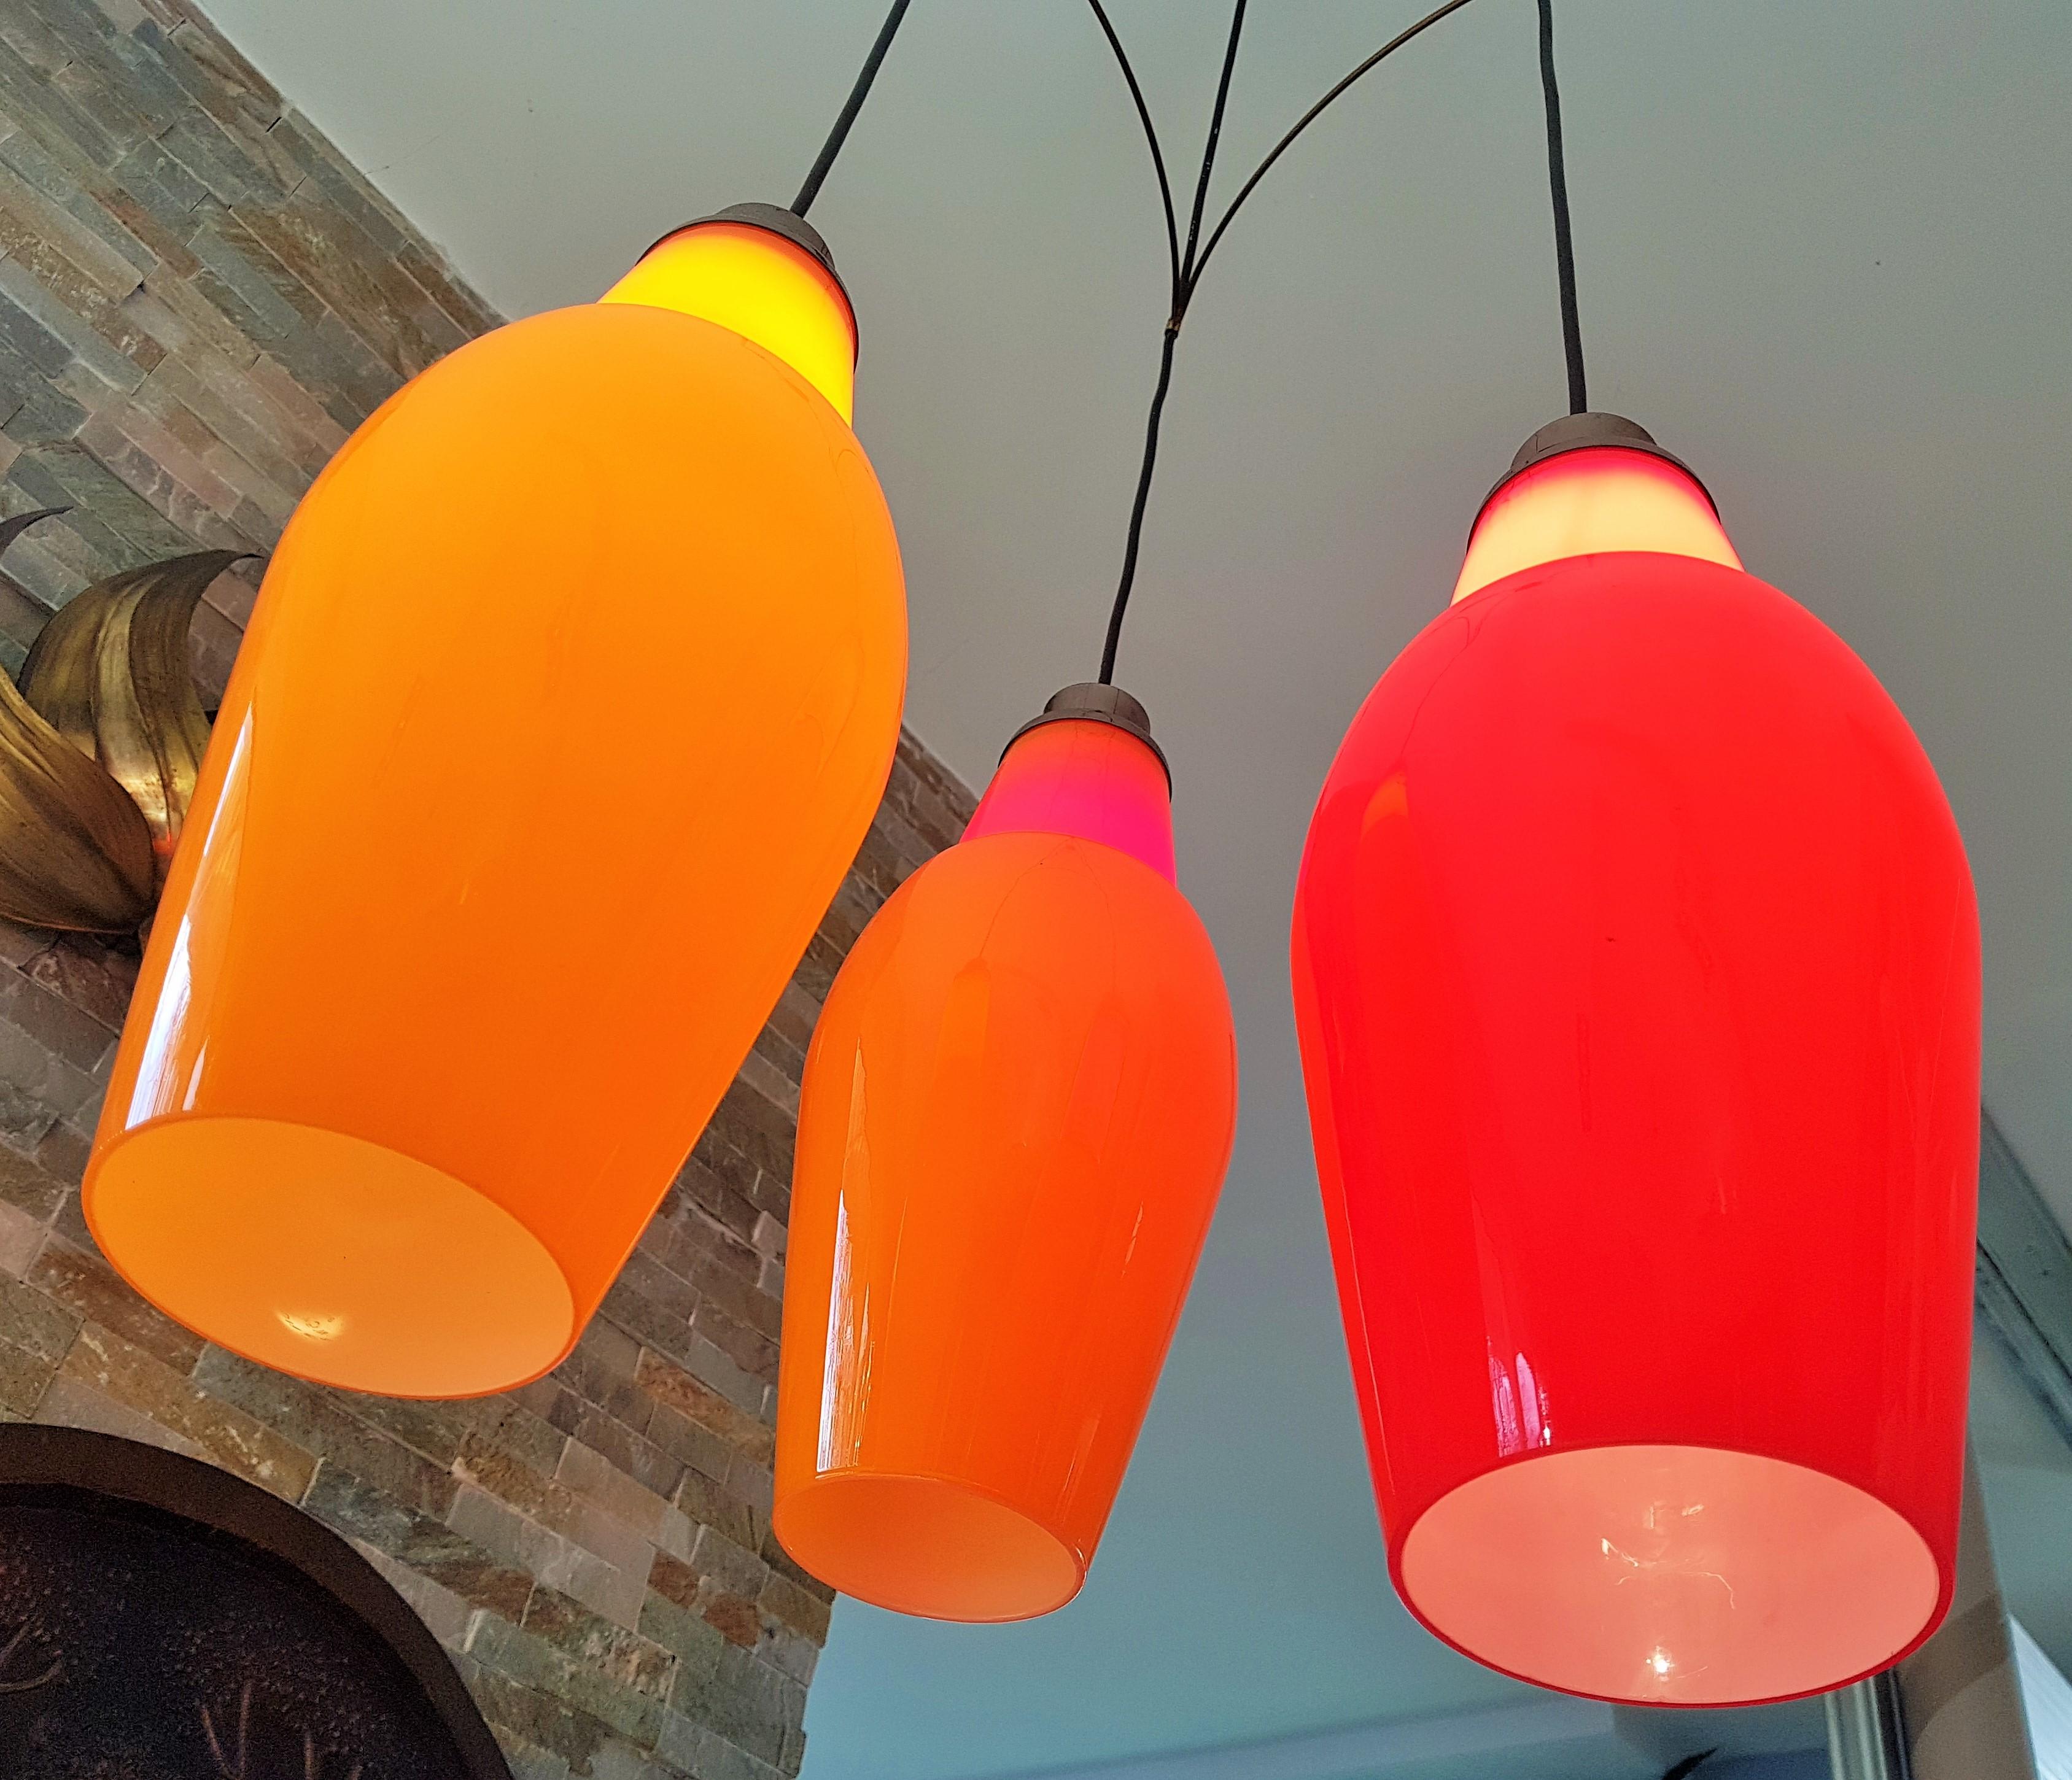 Cascade Midcentury Chandelier Pendant Multi-Color by Vistosi, Italy, 1960s For Sale 7